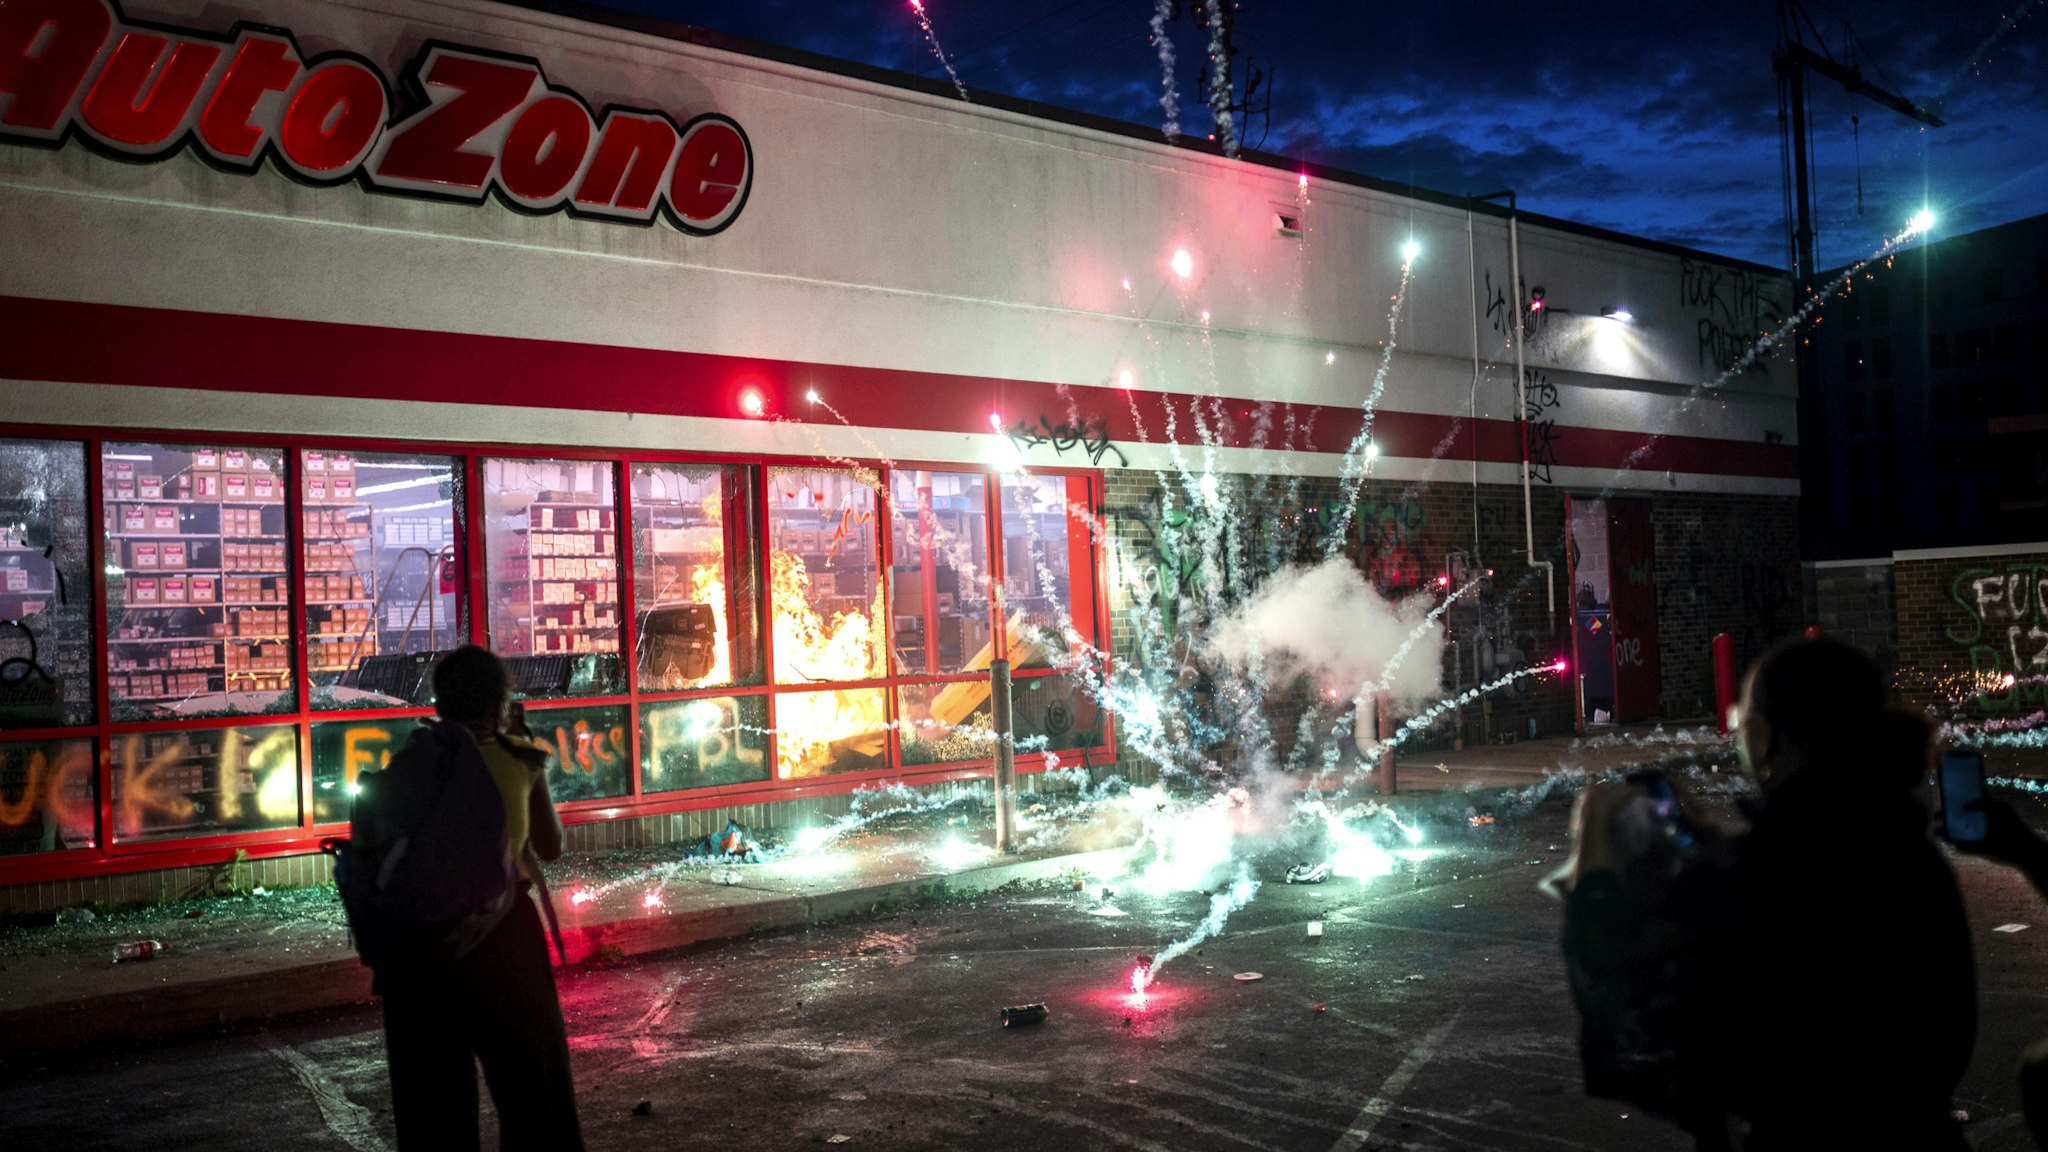 MINNEAPOLIS, MN - MAY 27: A firework explodes as a fire burns inside of an Auto Zone store near the 3rd Police Precinct on May 27, 2020 in Minneapolis, Minnesota. Businesses near the station were looted and damaged today as the area has become the site of an ongoing protest after the police killing of George Floyd. Four Minneapolis police officers have been fired after a video taken by a bystander was posted on social media showing Floyd's neck being pinned to the ground by an officer as he repeatedly said, "I can’t breathe". Floyd was later pronounced dead while in police custody after being transported to Hennepin County Medical Center.